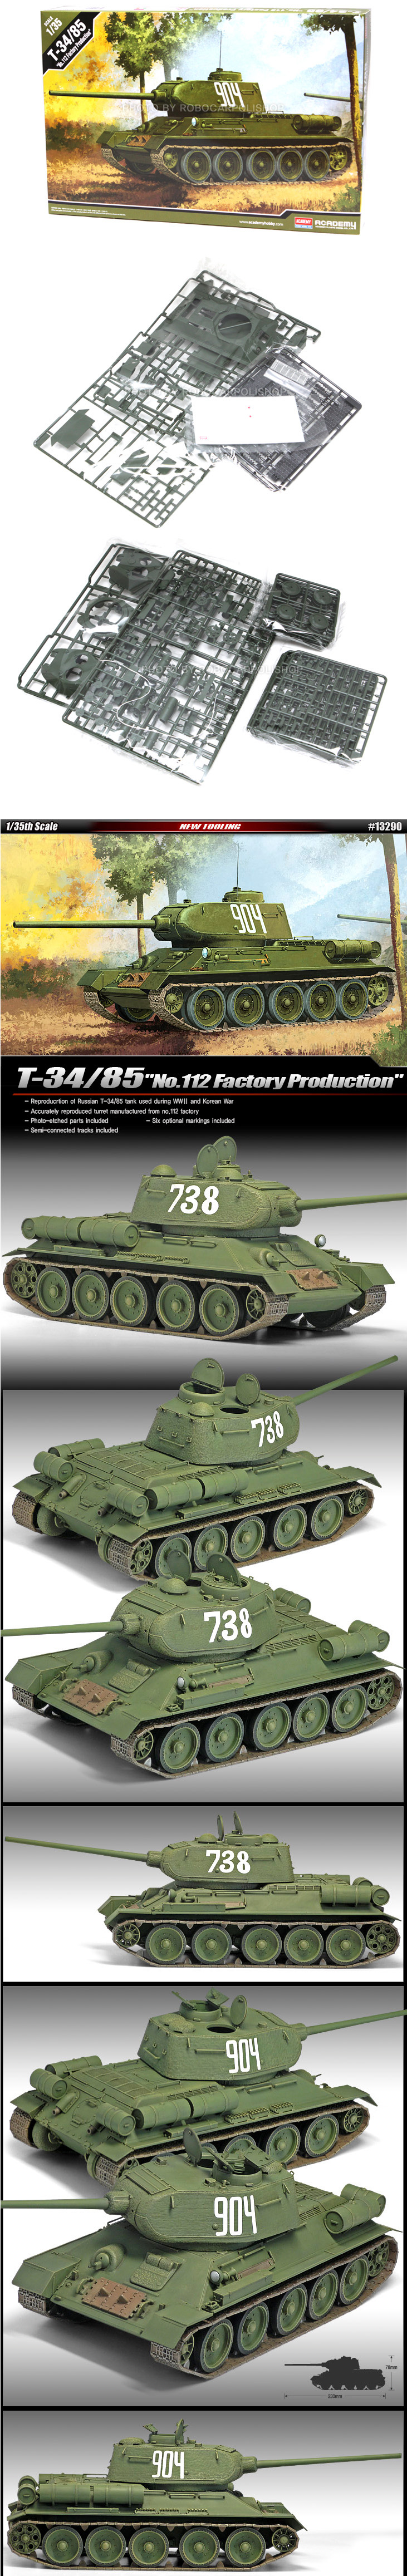 Academy 13290 T-34/85 No.112 Factory Production Tank Combat Vehicle Assembly_RU